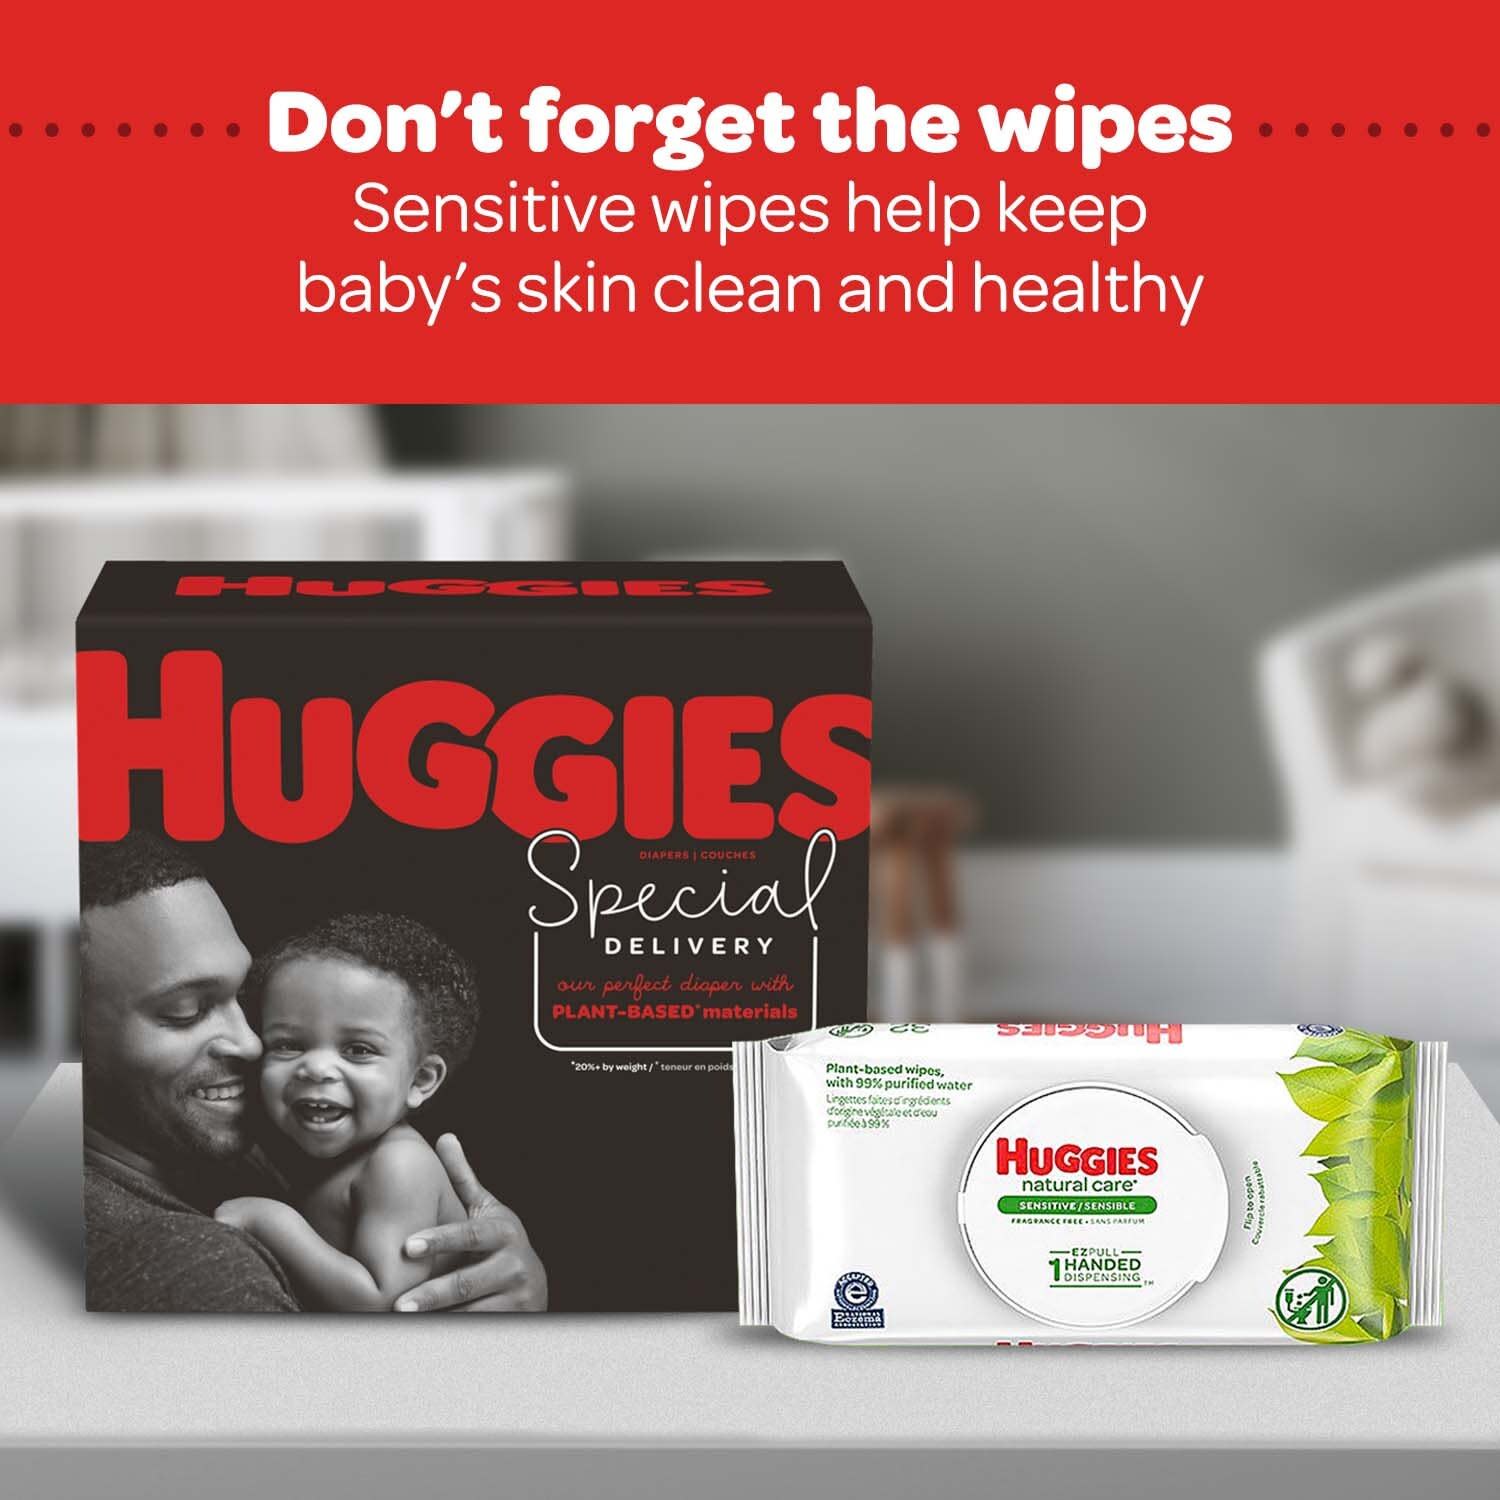 Huggies Special Delivery Hypoallergenic Newborn Baby Diapers, 76 Ct - image 4 of 10